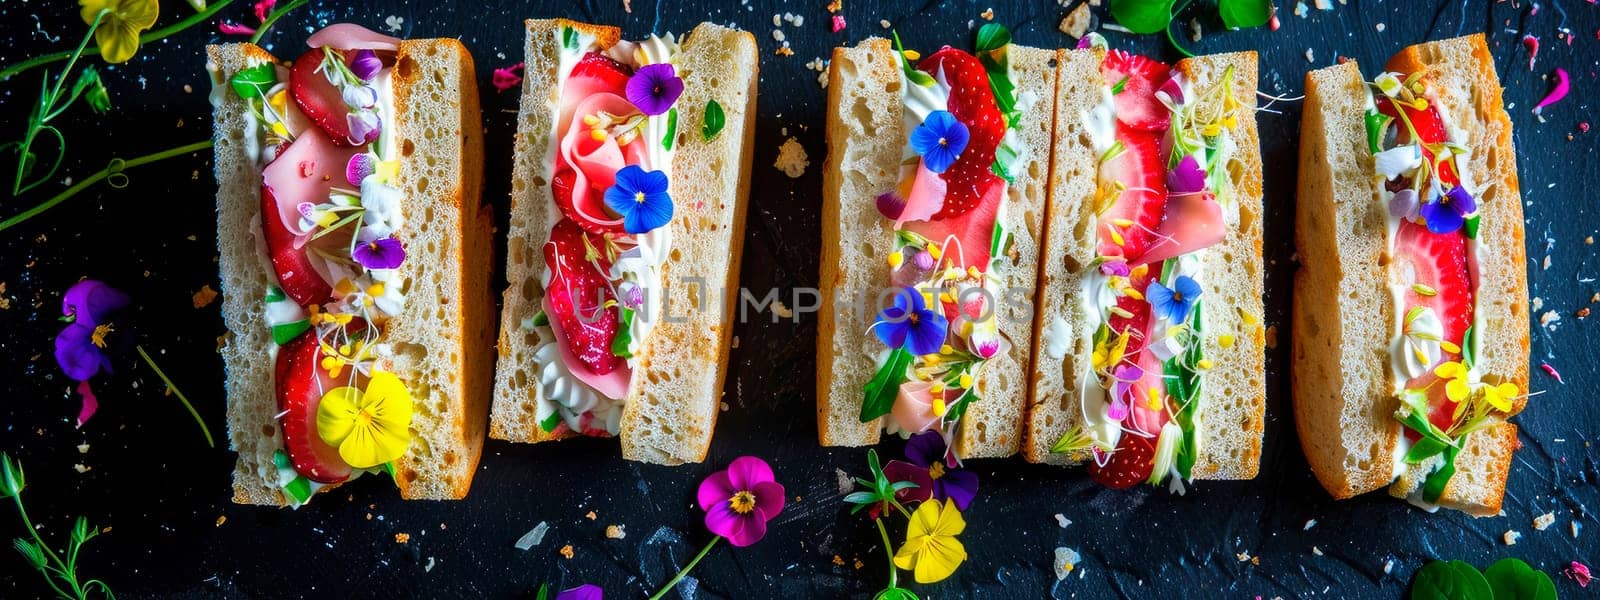 sandwiches with flowers on the table. selective focus. nature.